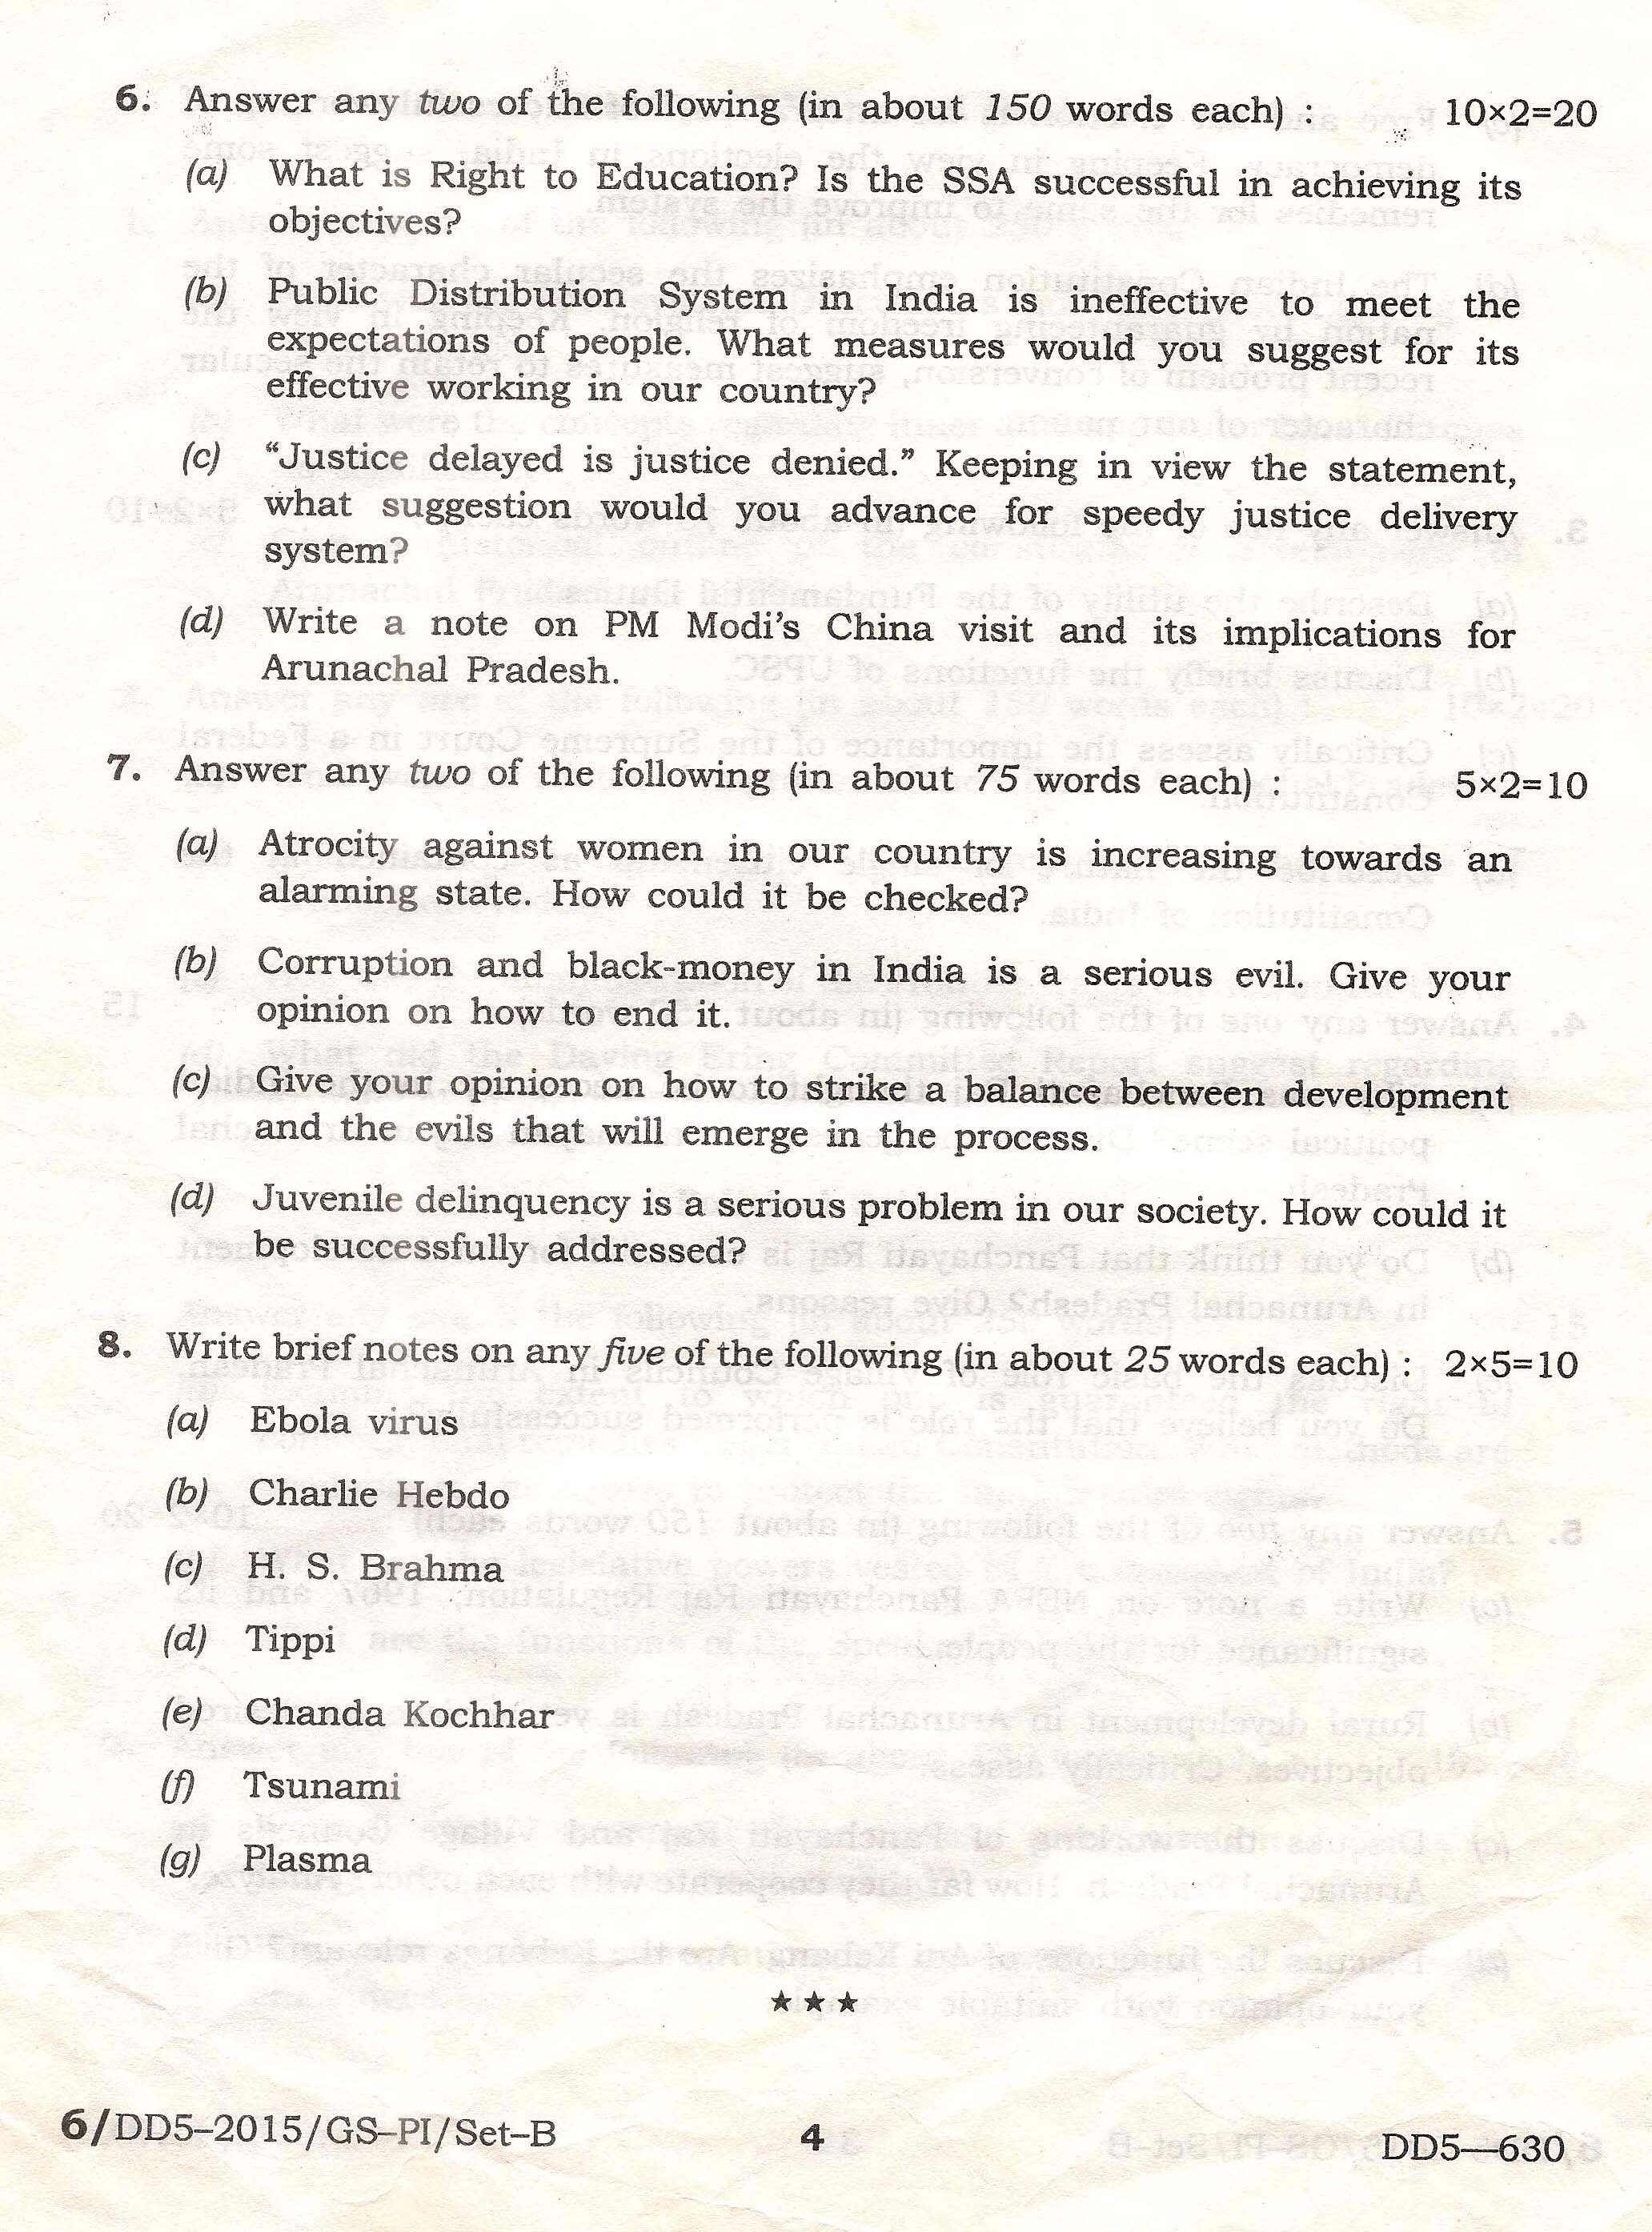 APPSC Combined Competitive Main Exam 2015 General Studies Paper I 4